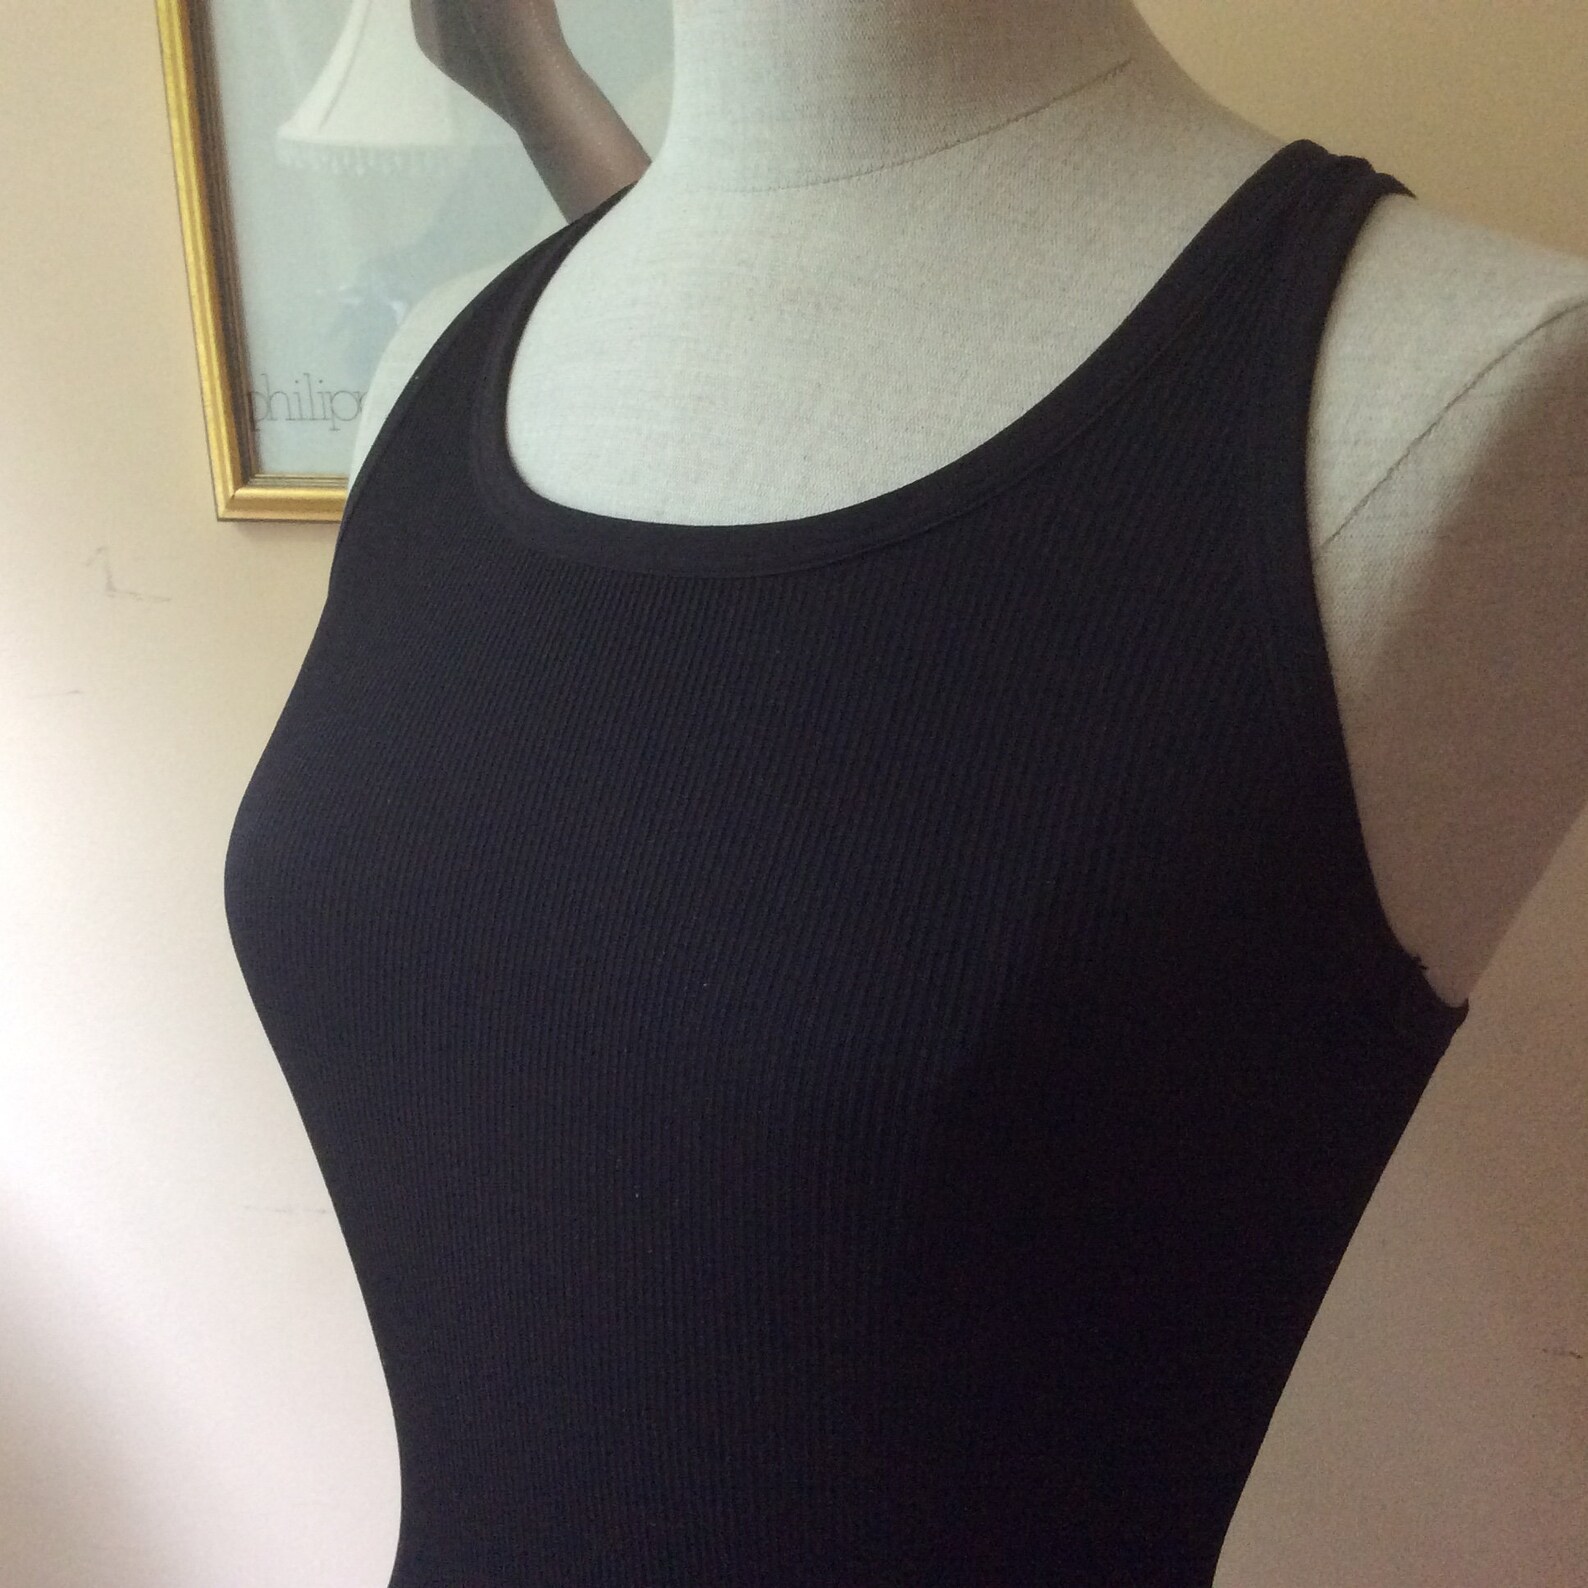 Holter Neck Exrcise Tank Top Racerback Black Ribbed - Etsy